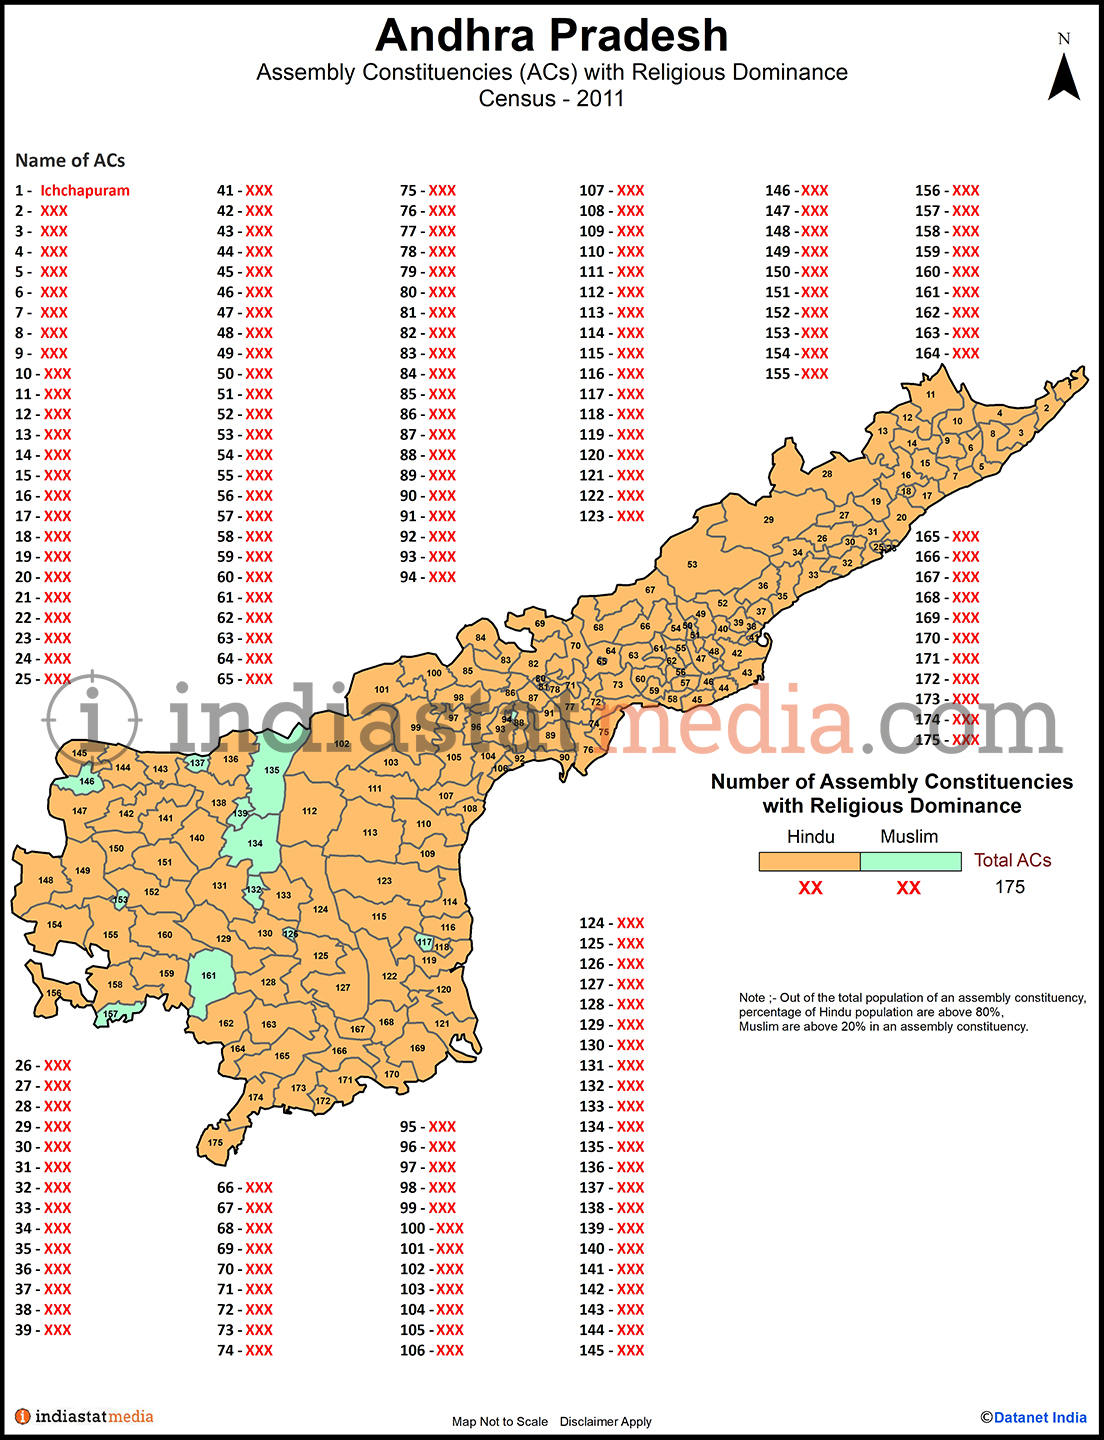 Assembly Constituencies (ACs) with Religious Dominance in Andhra Pradesh - Census 2011